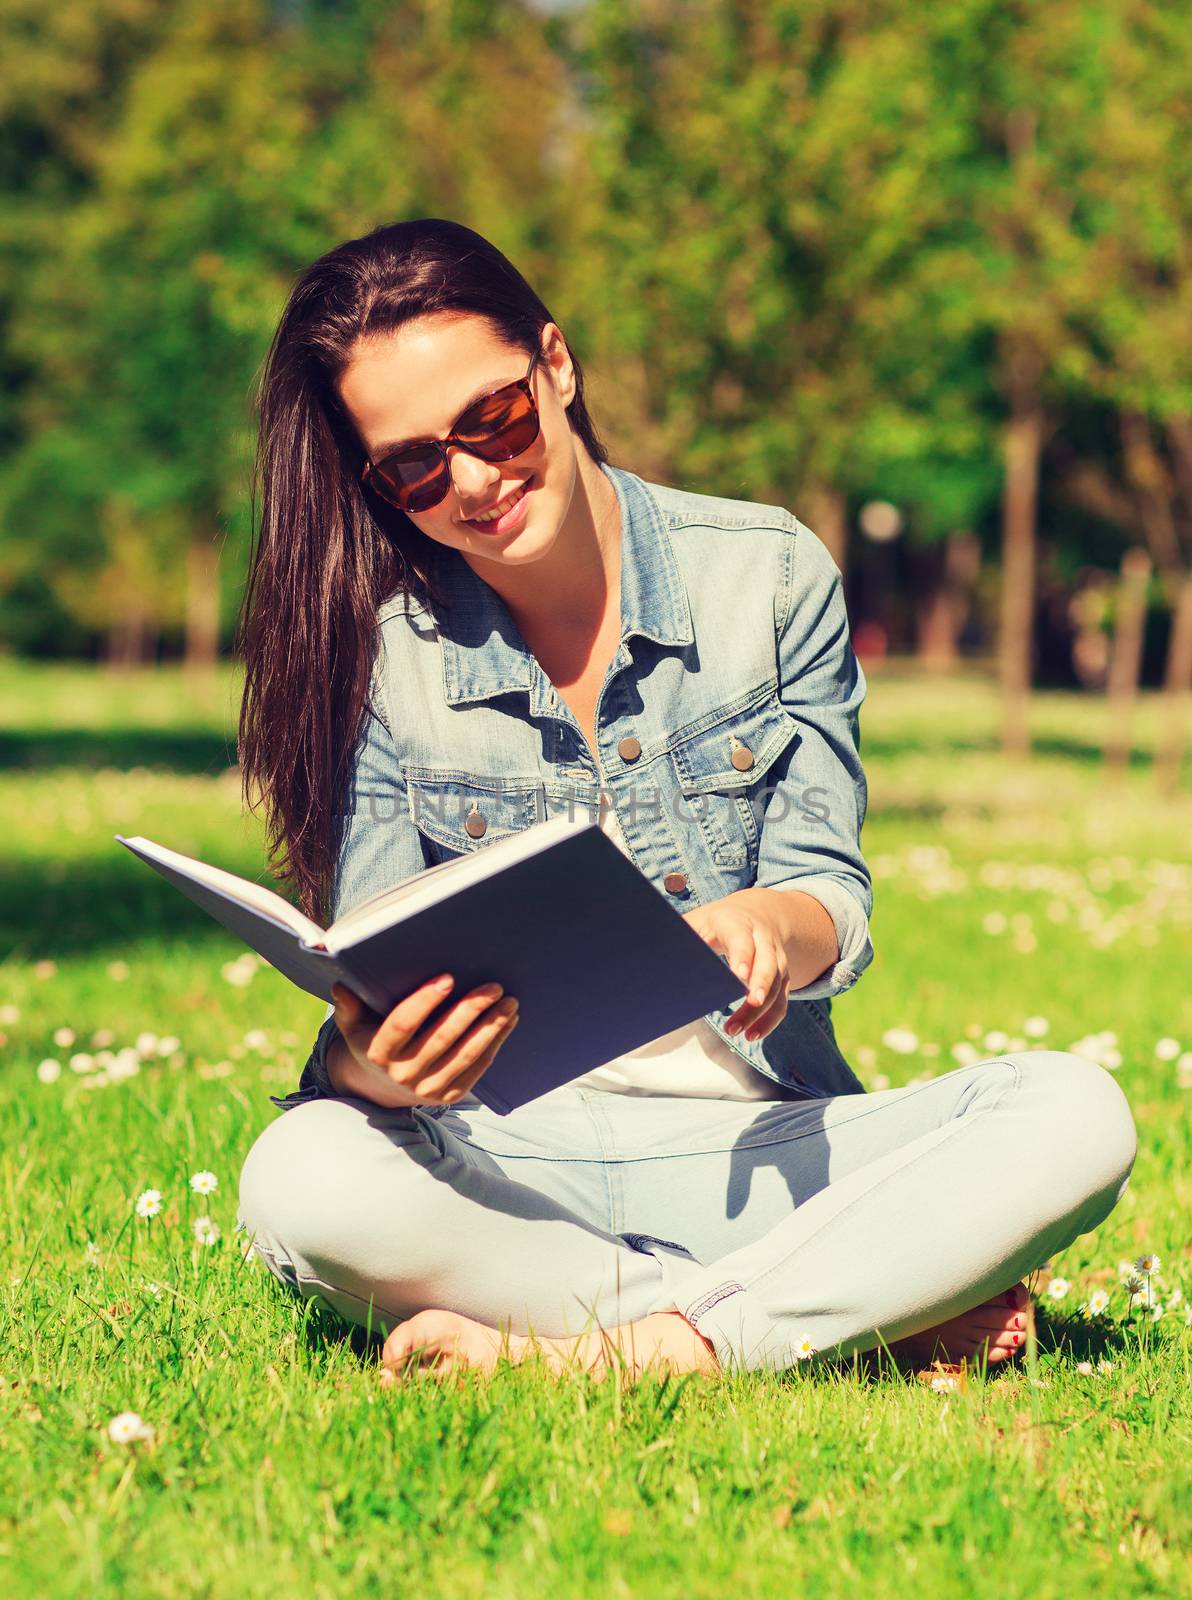 lifestyle, summer vacation, education, literature and people concept - smiling young girl reading book and sitting on grass in park